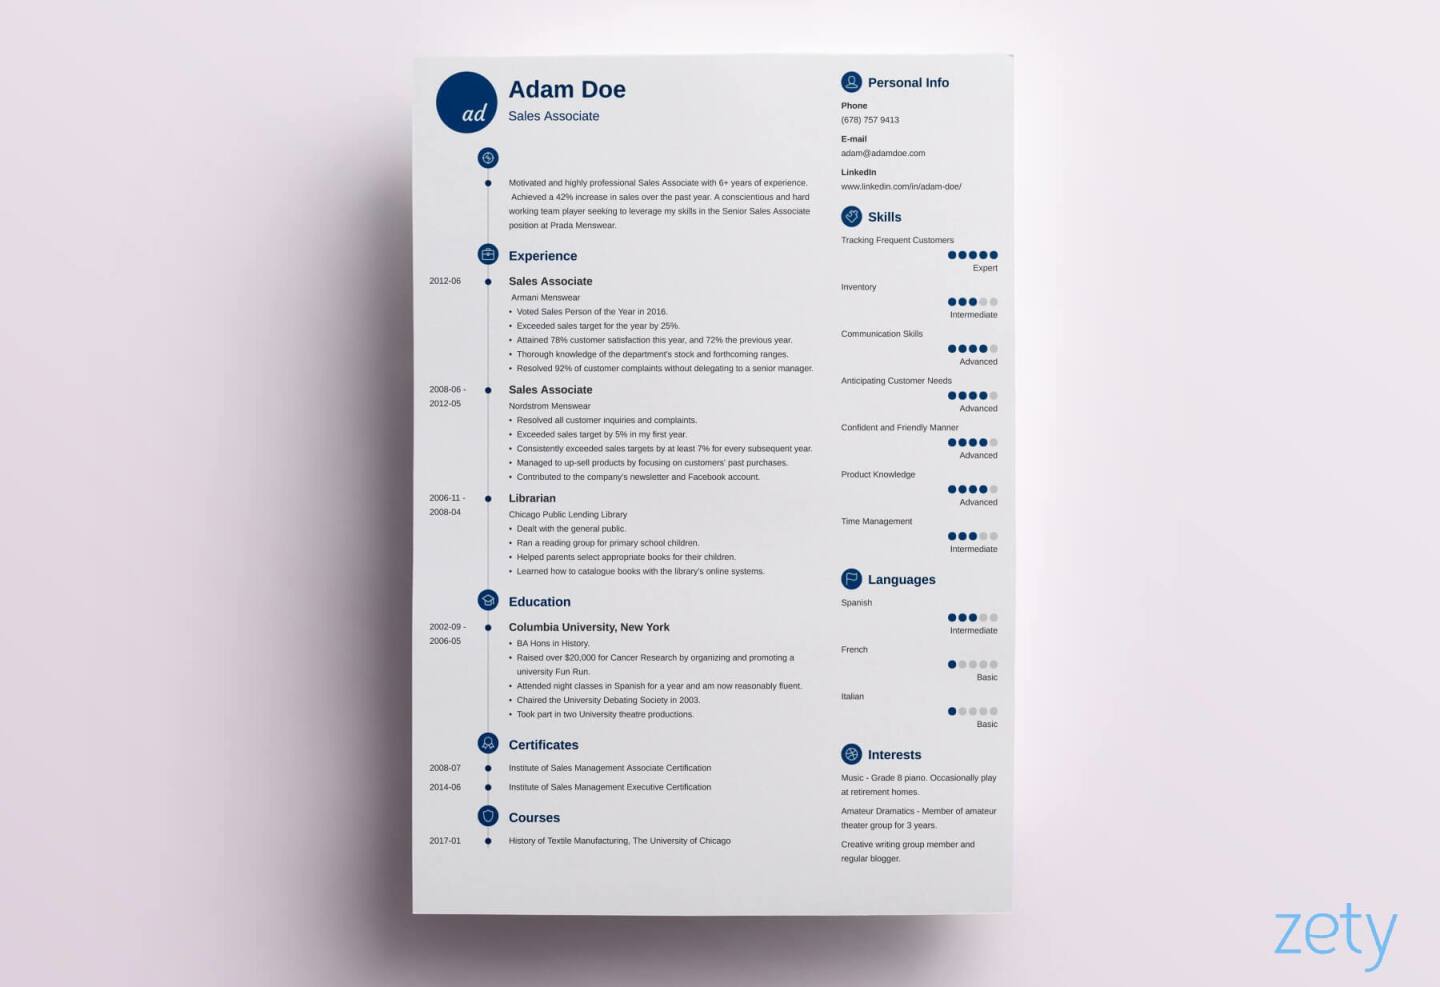 Resume Icons, Logos & Symbols [100+ to Download for Free]